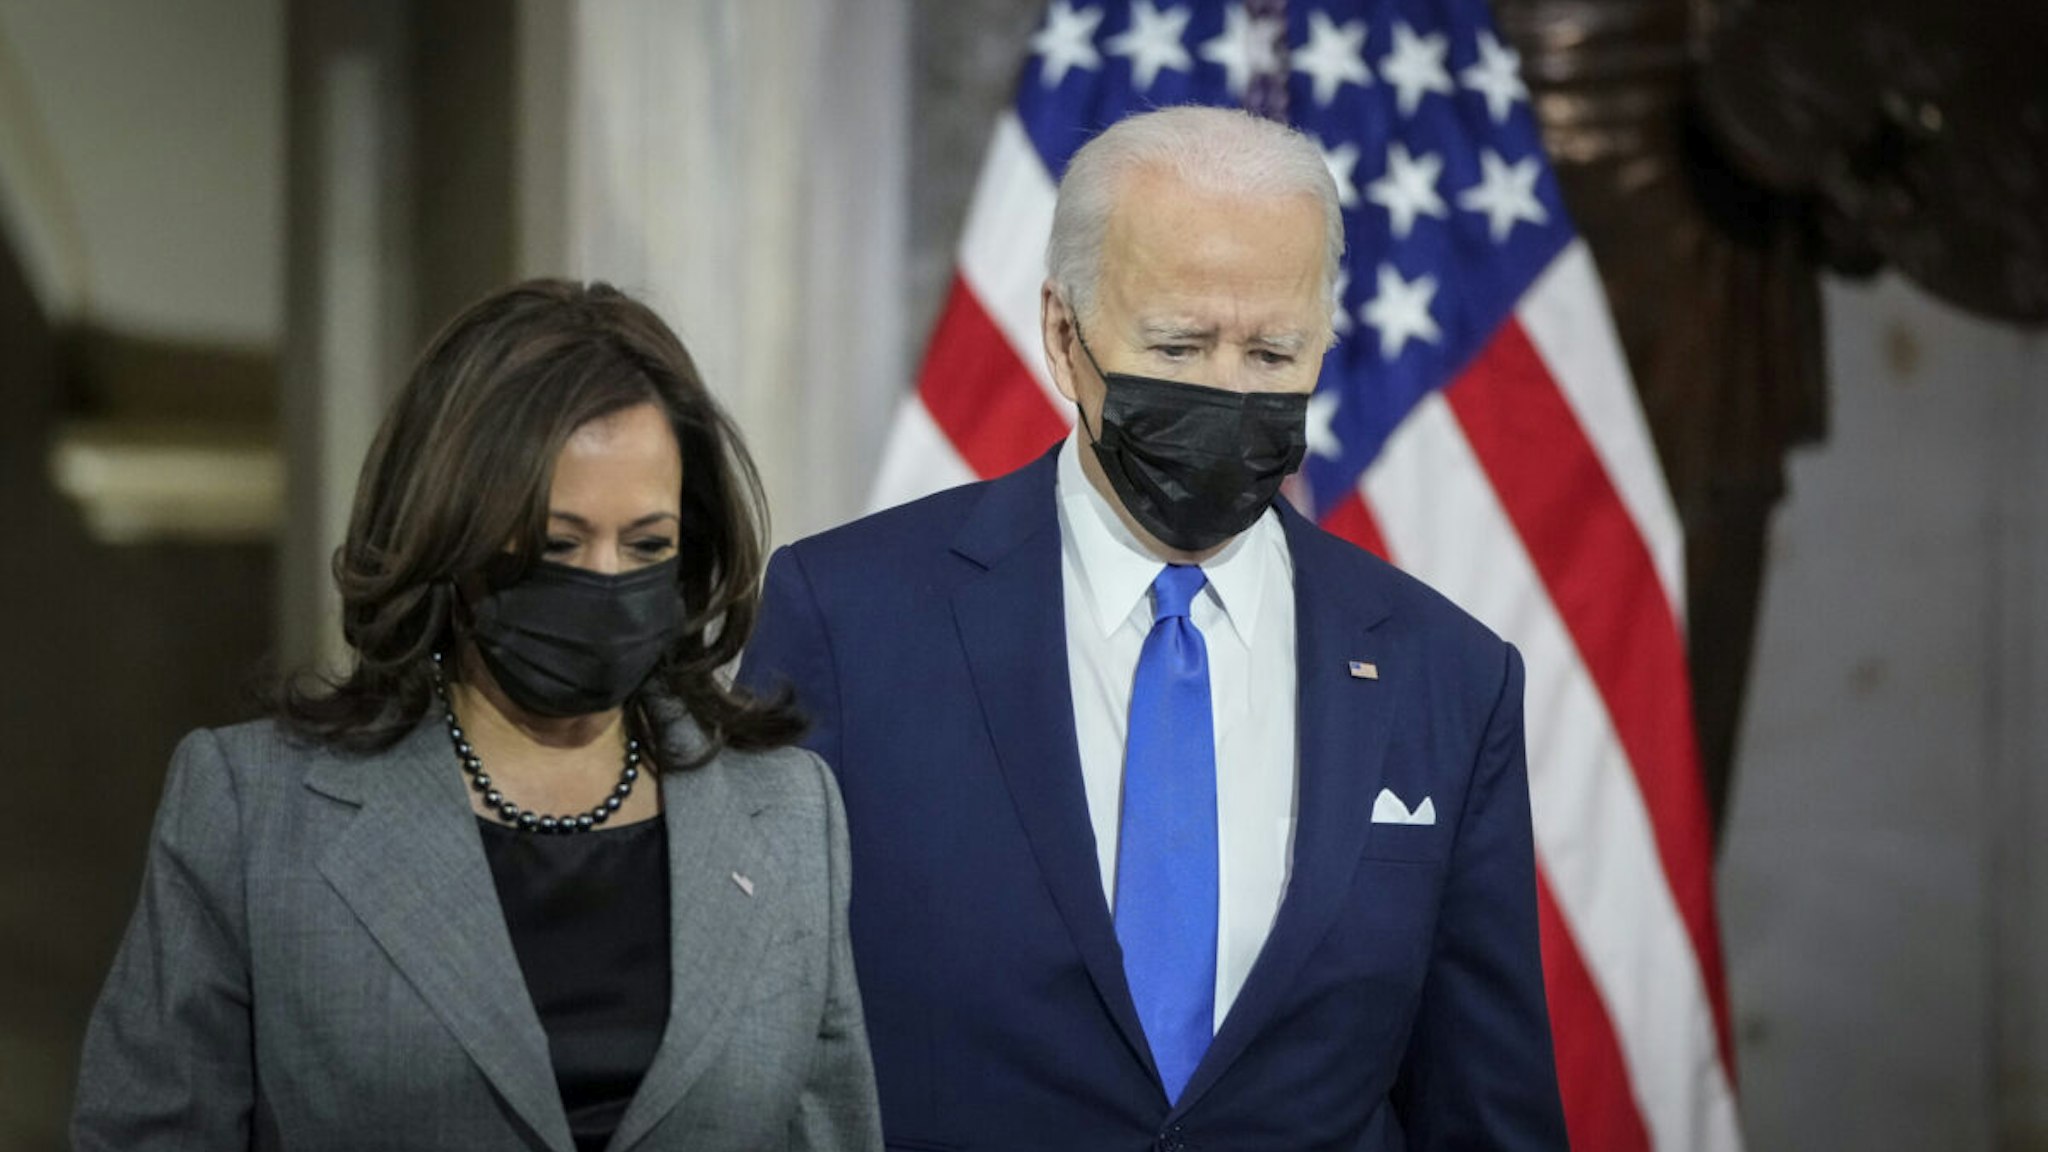 President Joe Biden and Vice President Kamala Harris arrive to deliver remarks on the one year anniversary of the January 6 attack on the U.S. Capitol, during a ceremony in Statuary Hall at the U.S. Capitol on January 06, 2022 in Washington, DC.